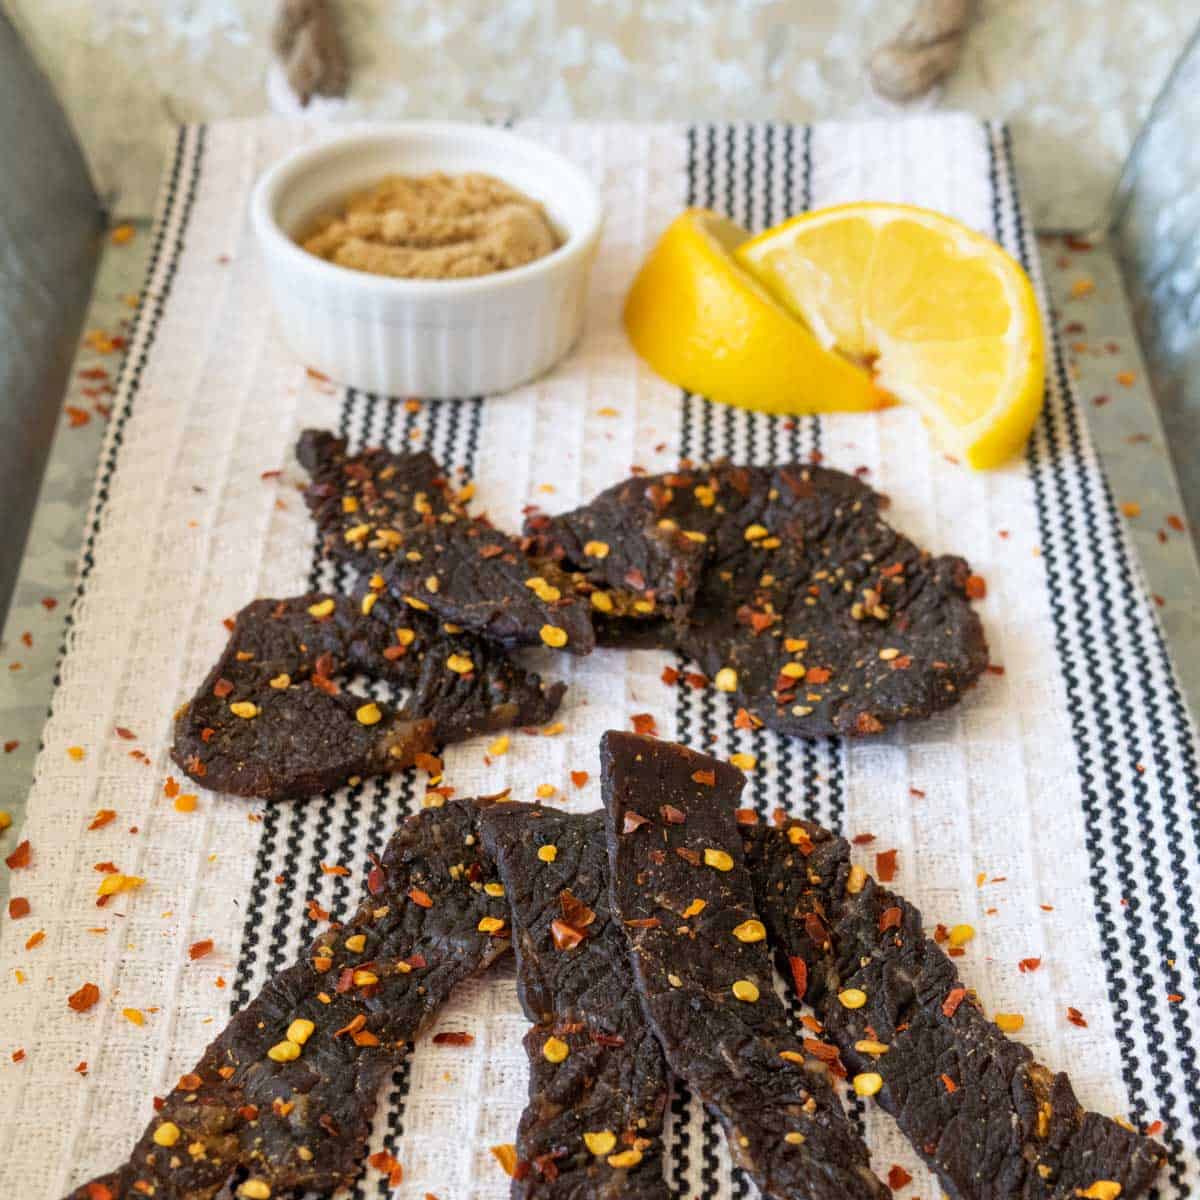 beef jerky on tray with lemons and spices